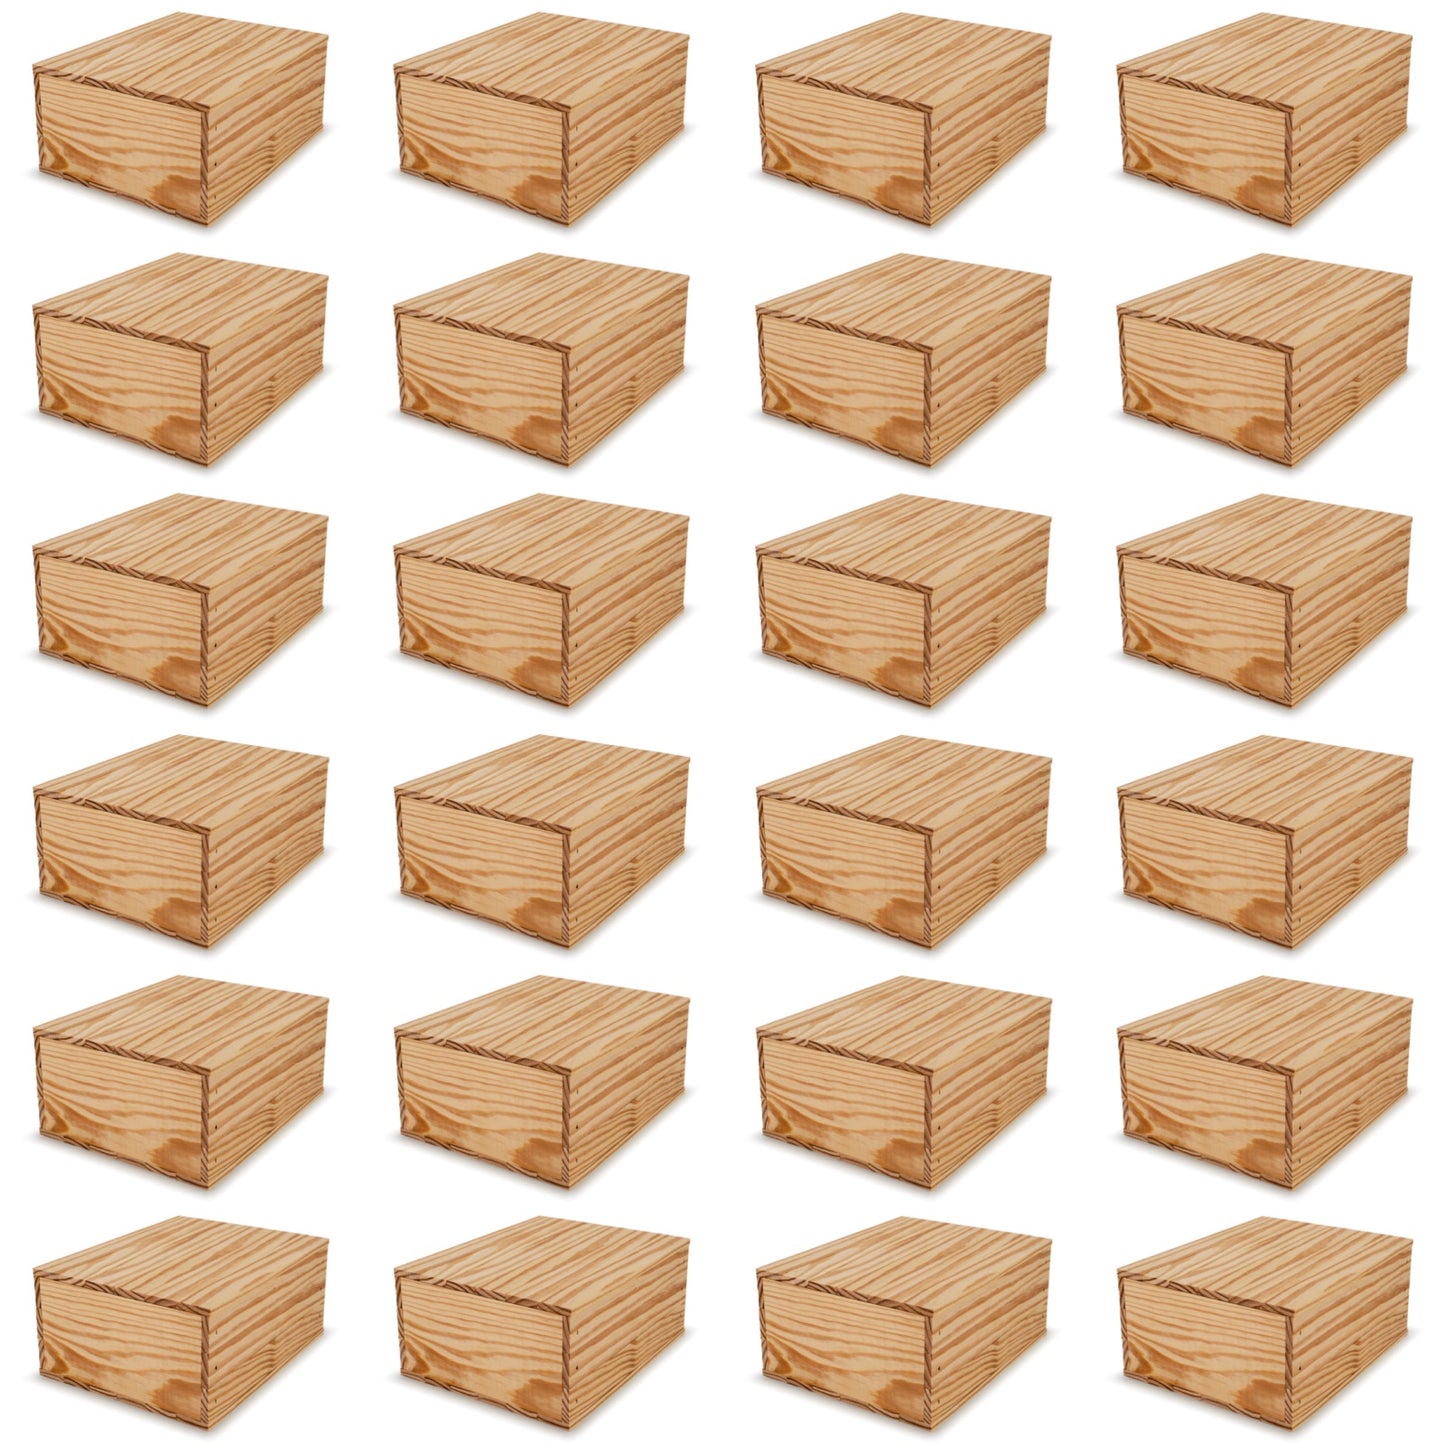 24 Small wooden crates with lid 9x8x3.5